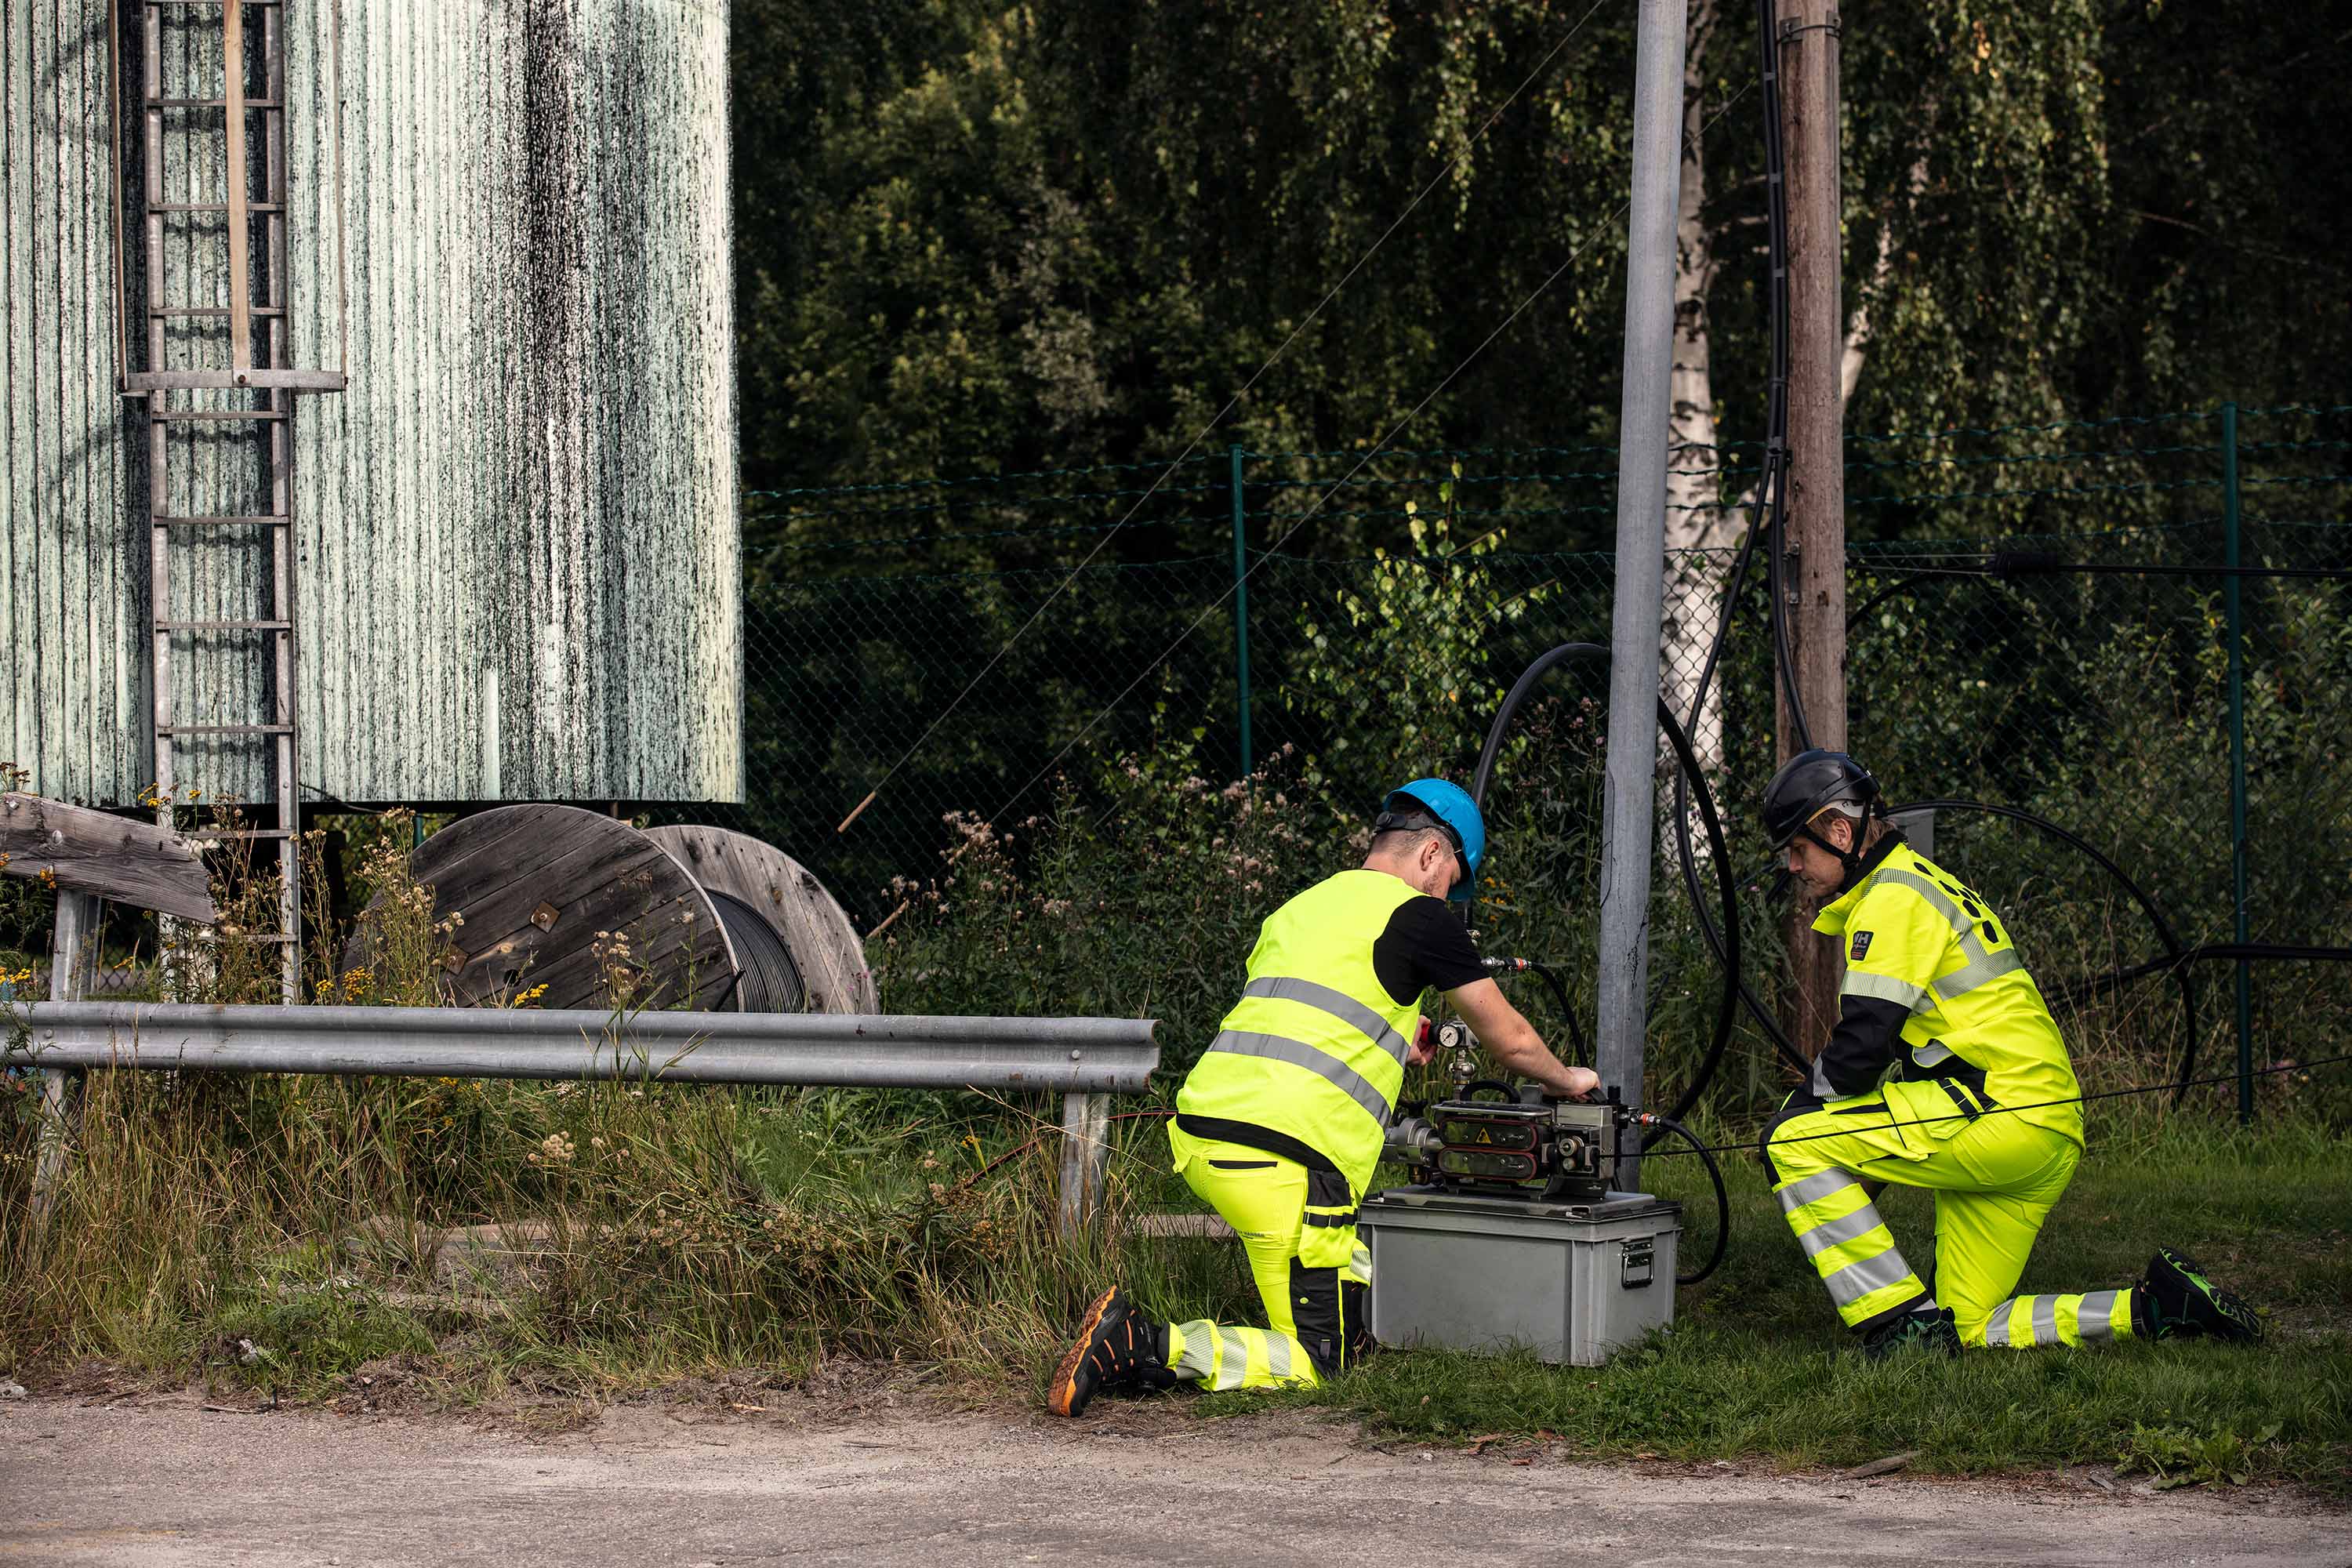 Two workers in yellow safety gear are attending to equipment near a large green structure, surrounded by greenery and a metal fence.